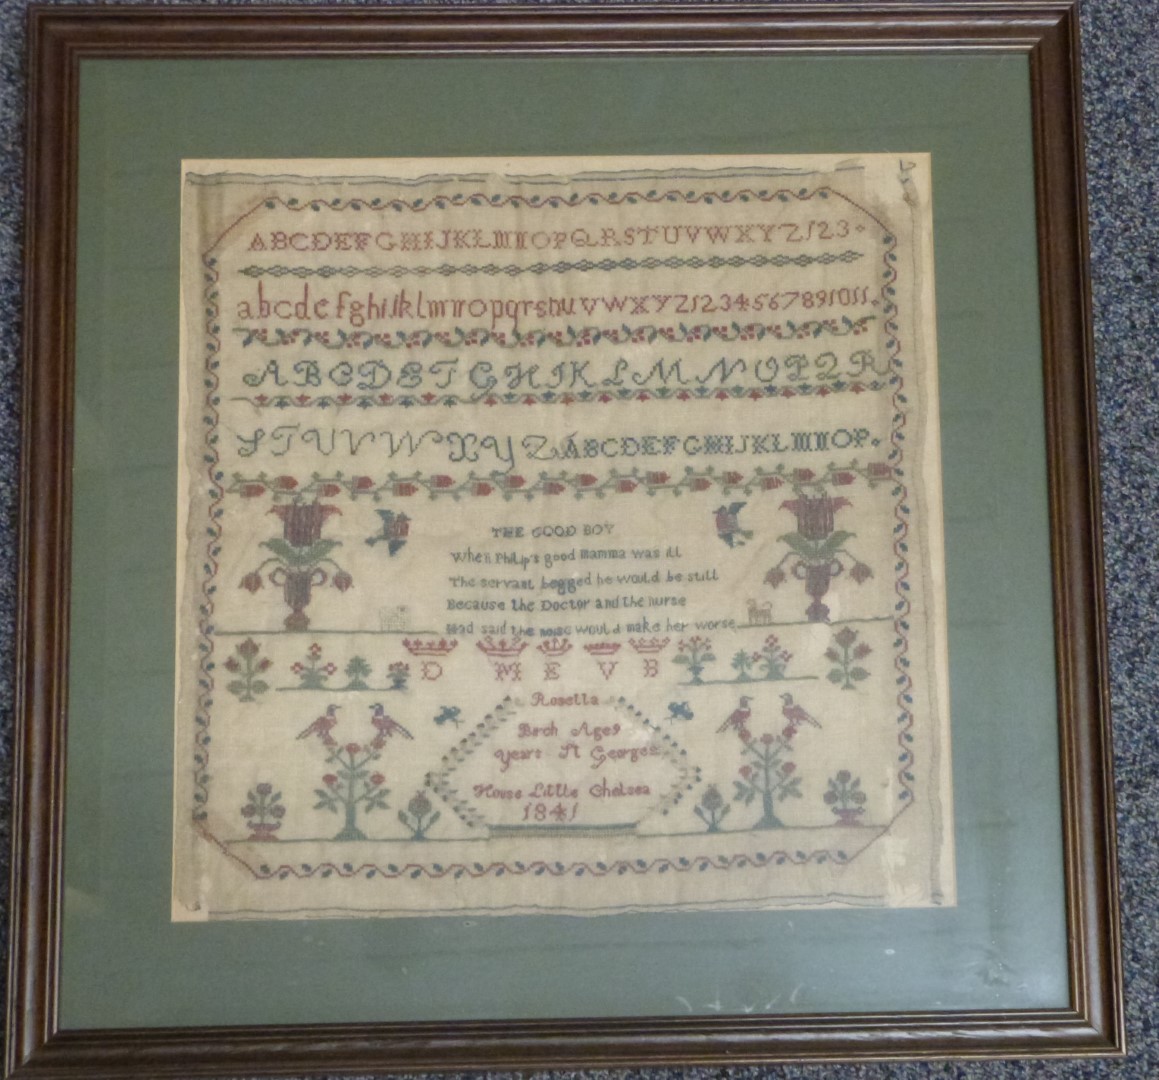 An early Victorian embroidery sampler by Rosetta Birch, aged 9, St George's House, Little Chelsea,